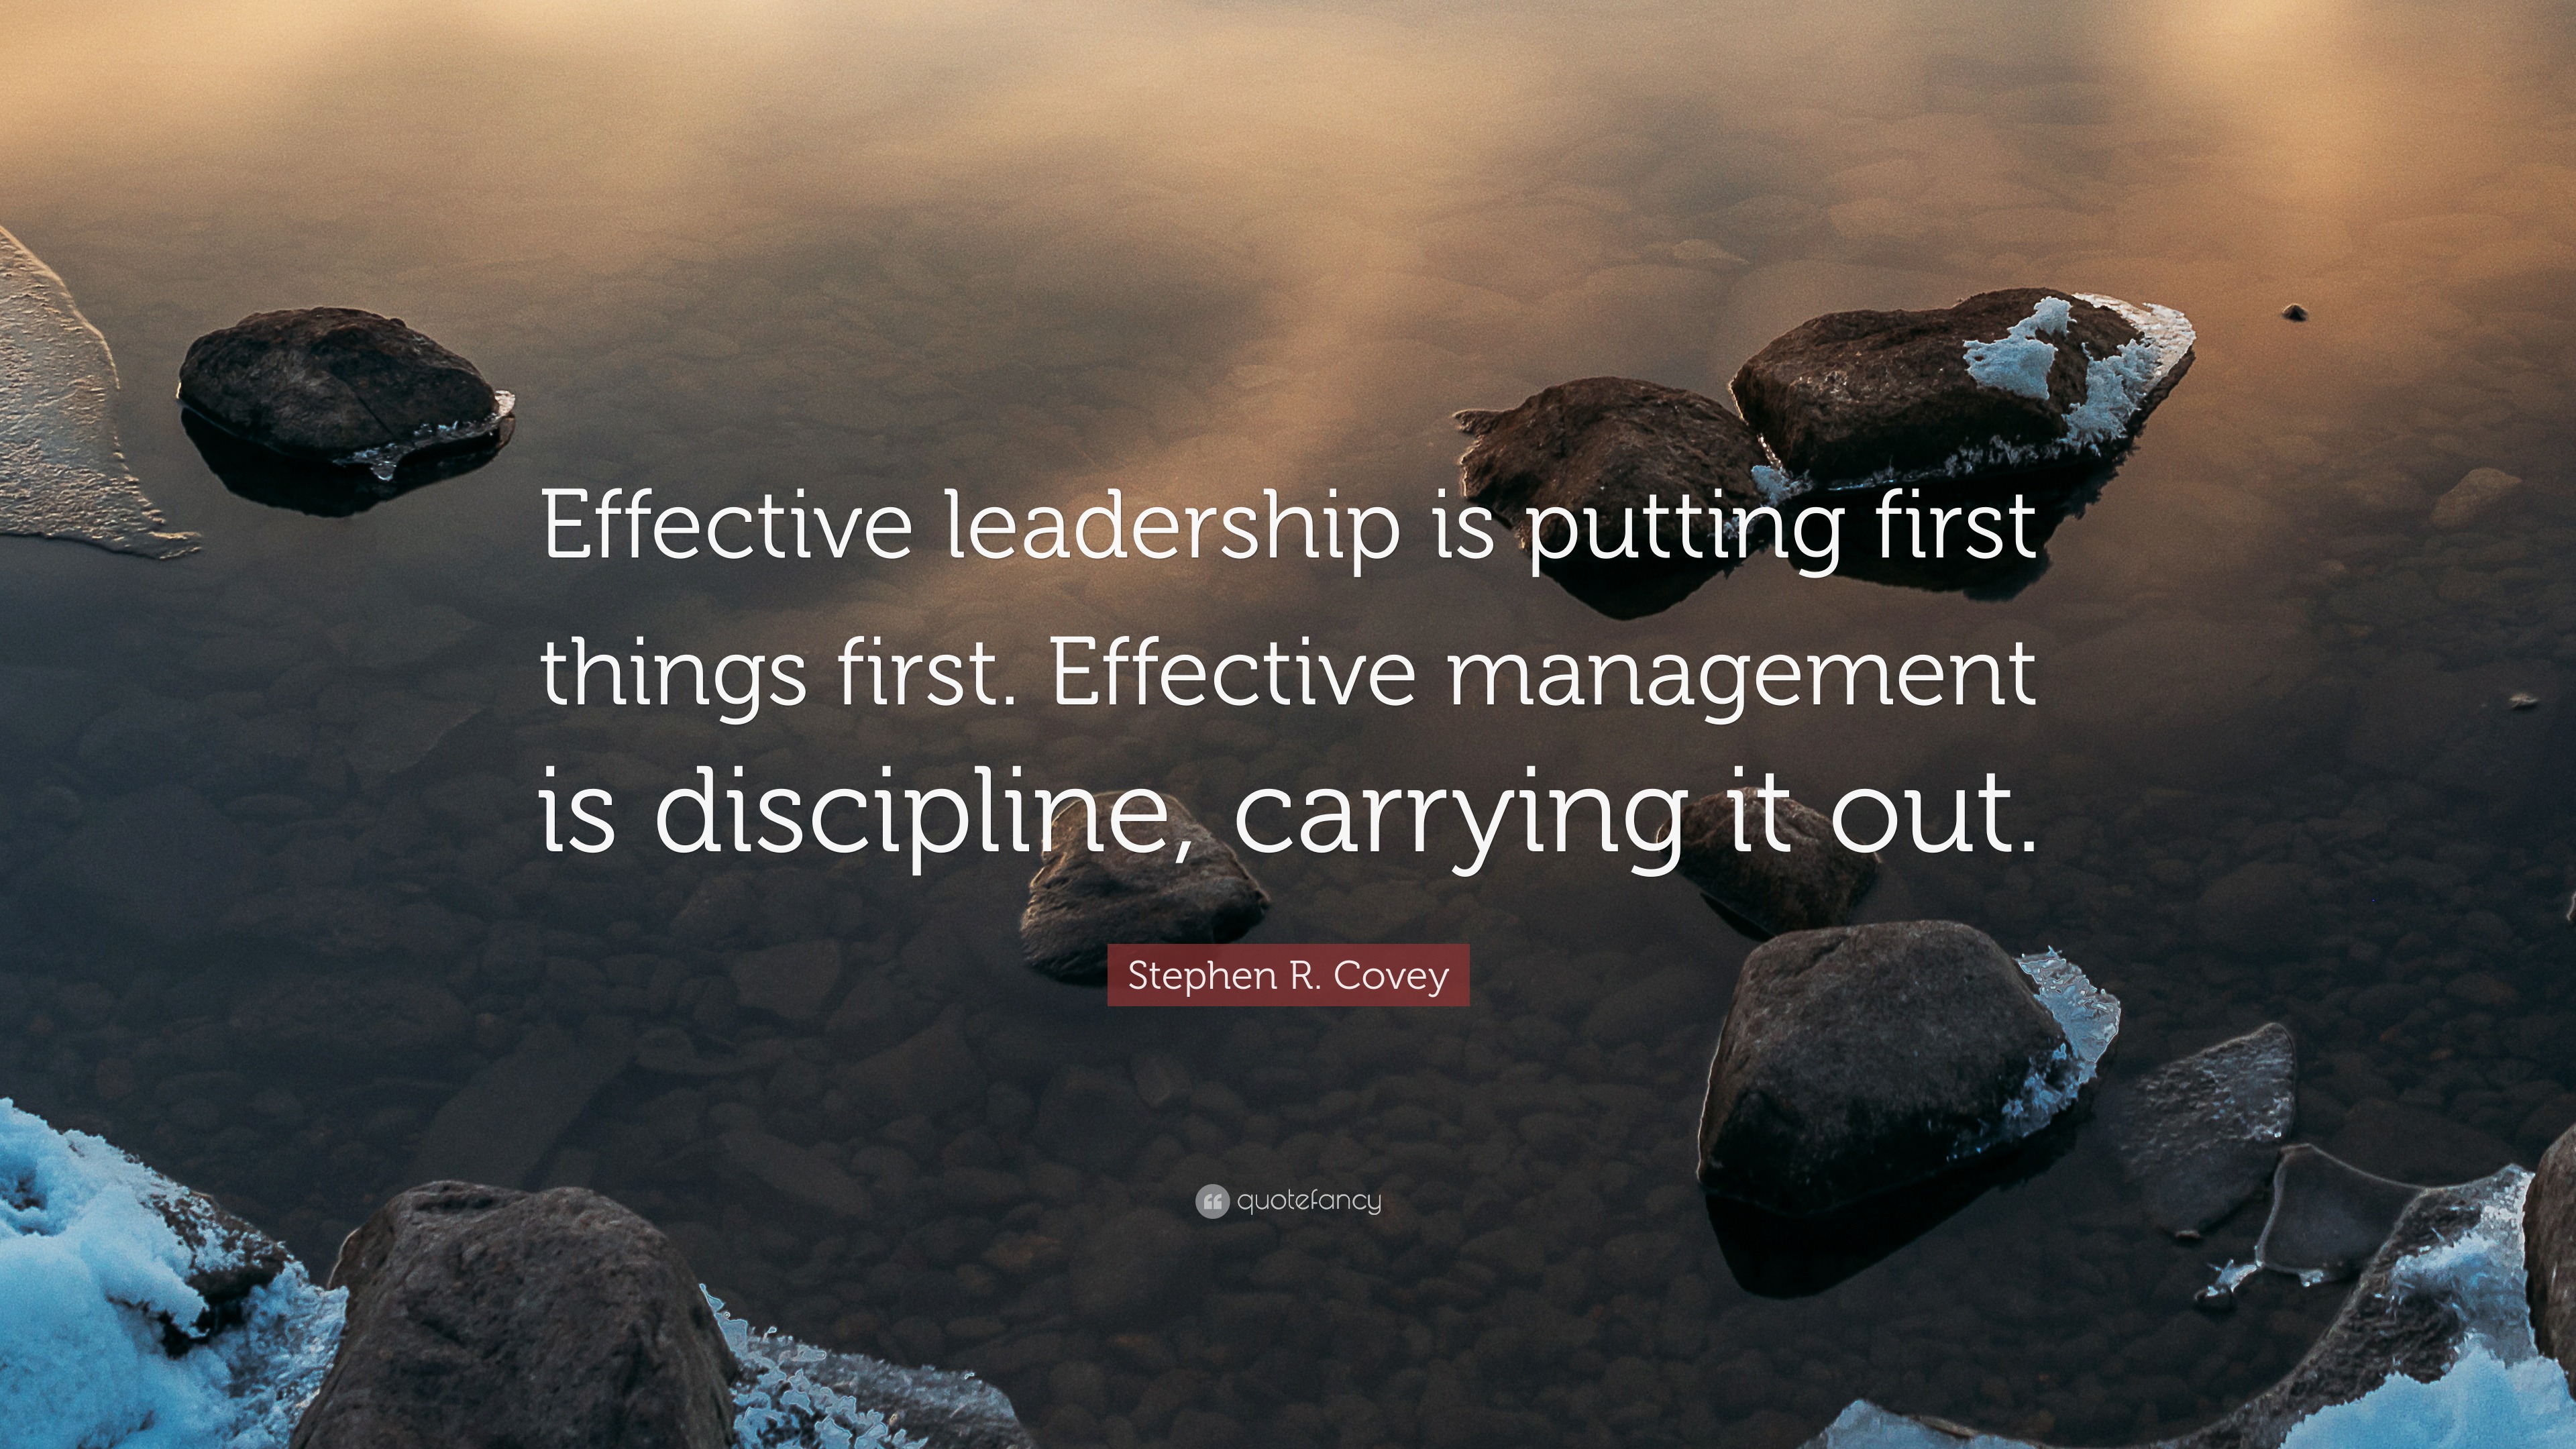 Stephen R. Covey Quote: “Effective leadership is putting first things